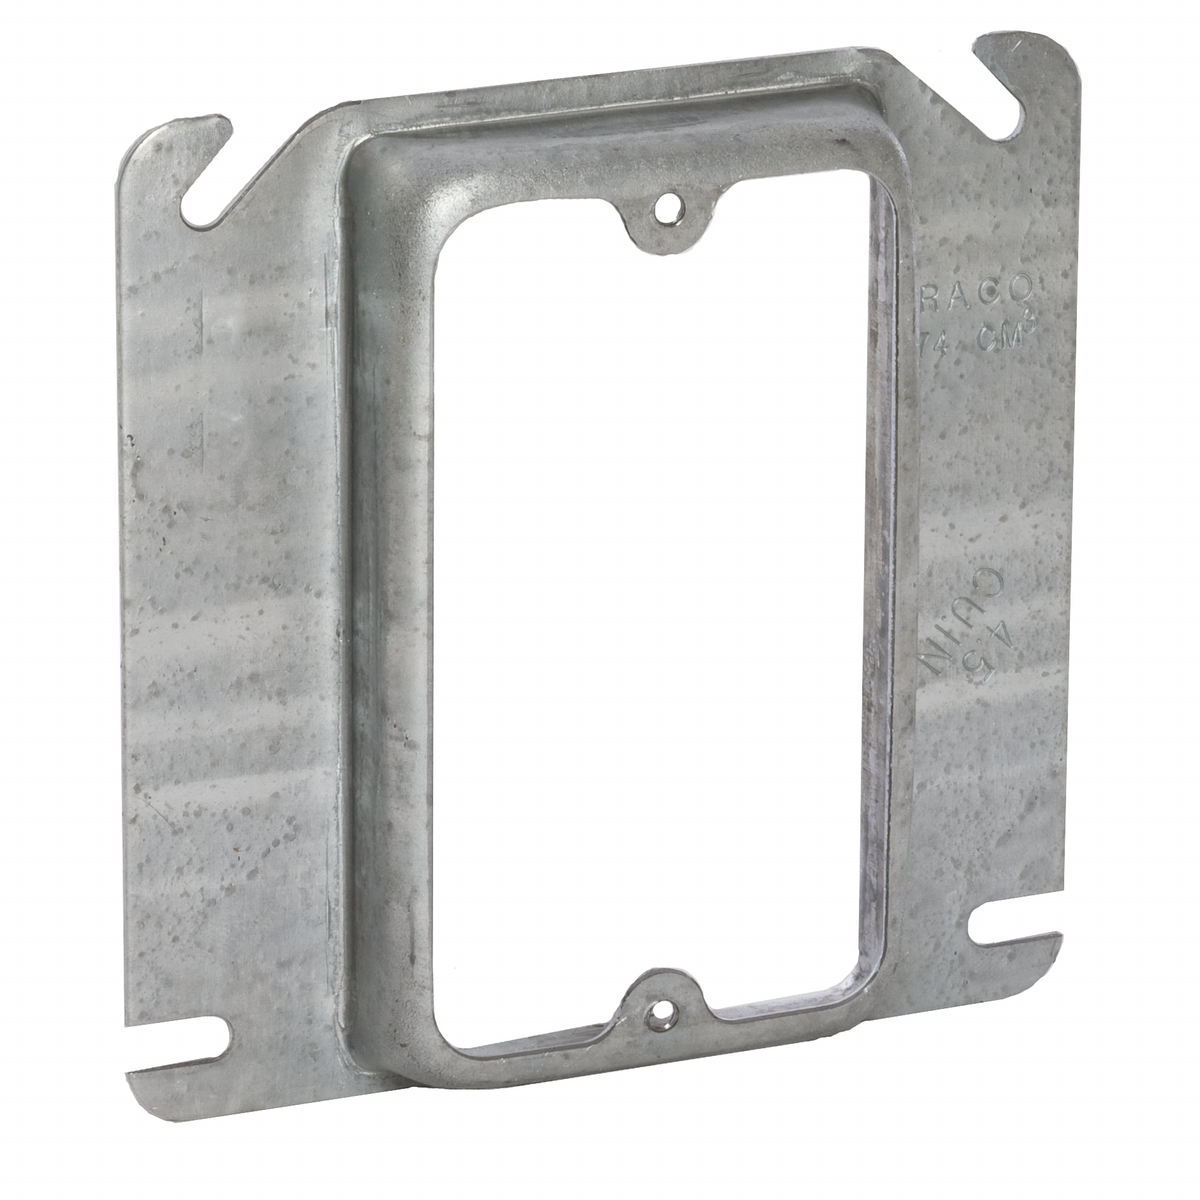 RACO 768 4" SQUARE 5/8D 1G SWITCH RING